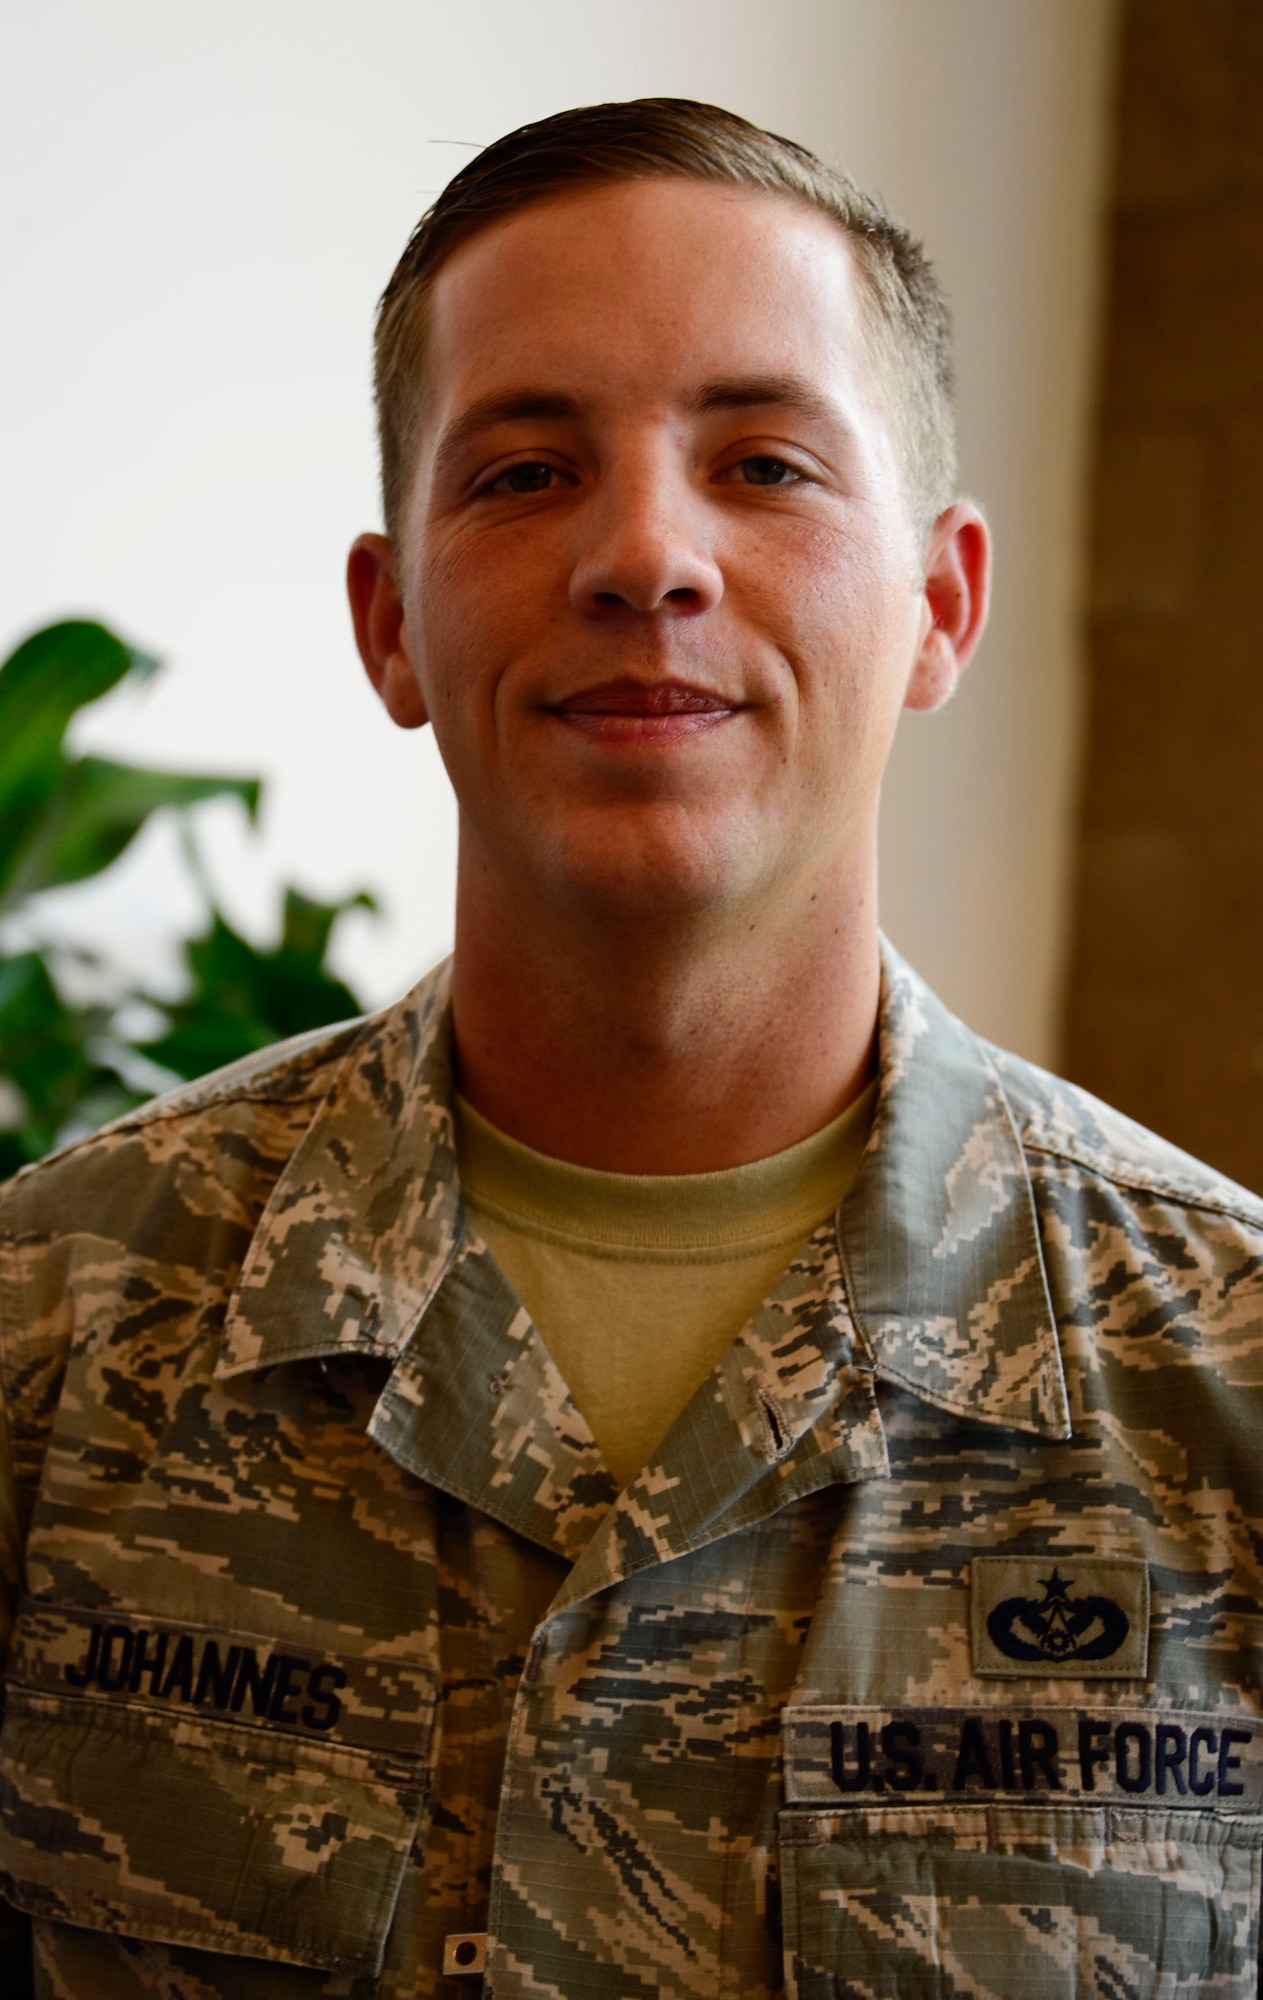 Staff Sgt. Brad Johannes 12th Air Force (Air Forces Southern) manager of engineering operations, poses for a photo at Davis-Monthan AFB, Ariz., Aug. 27, 2015. Sgt. Johannes was designated for the Warfighter of the Week on Aug. 24, 2015. War Fighter of the Week is an opportunity for the Airmen who represent 12th AF (AFSOUTH) to share their own story. The Warfighter of the Week initiative aligns with the 12th AF (AFSOUTH) commander’s priority of creating a work environment where someone knows you both professionally and personally. (U.S. Air Force photo by Tech. Sgt. Heather Redman/Released)